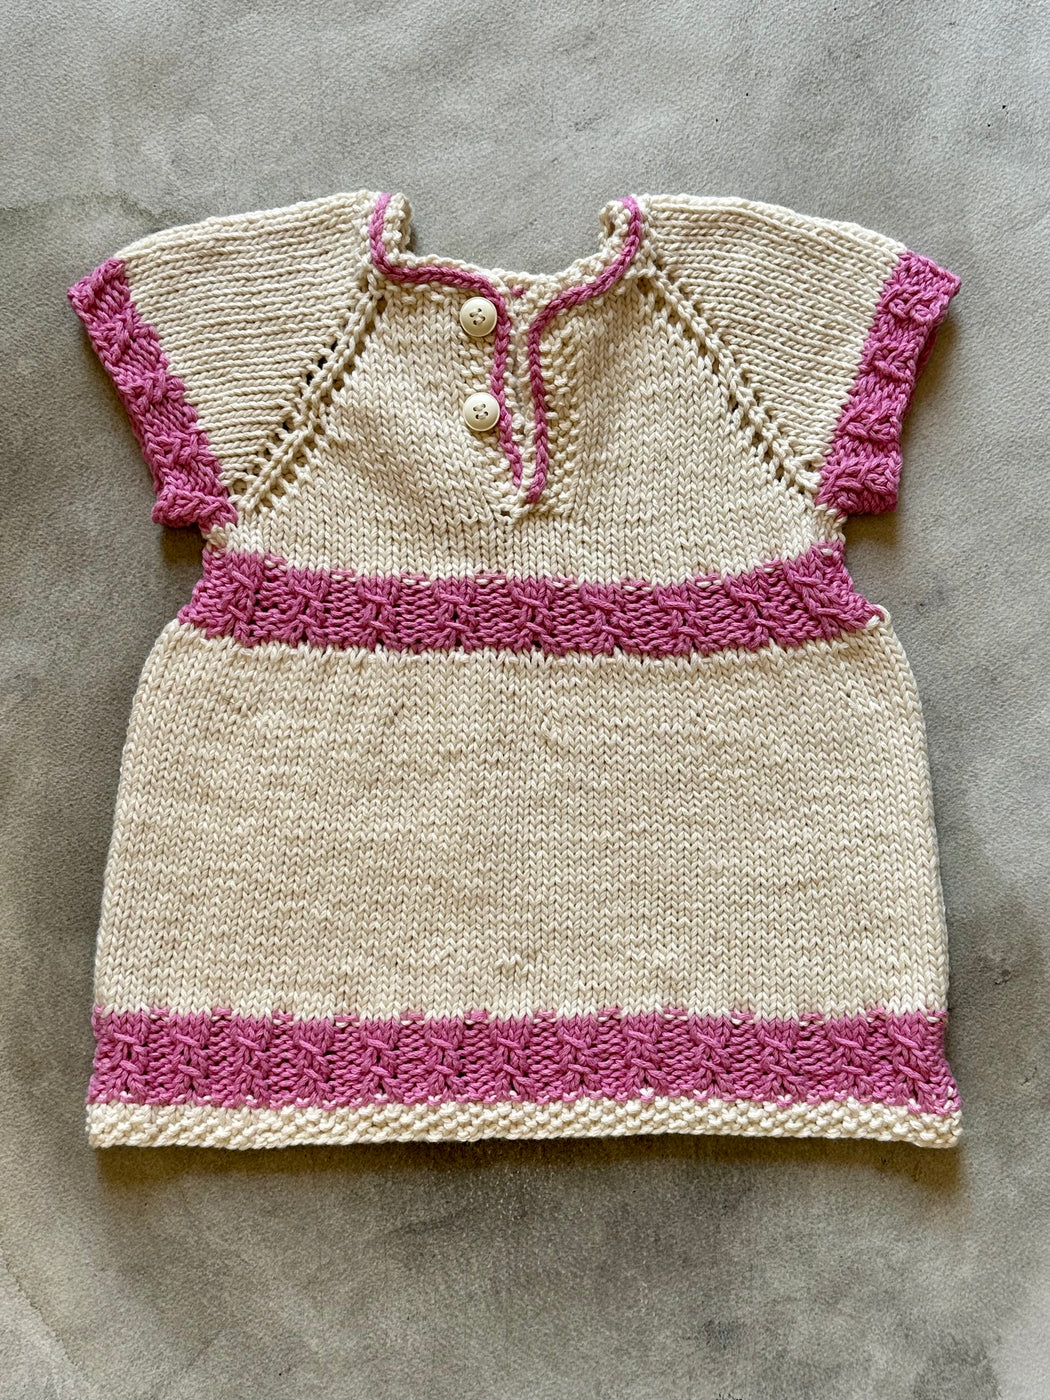 Hand-Knitted Cotton Baby Dress by Albo - Ivory & Pink